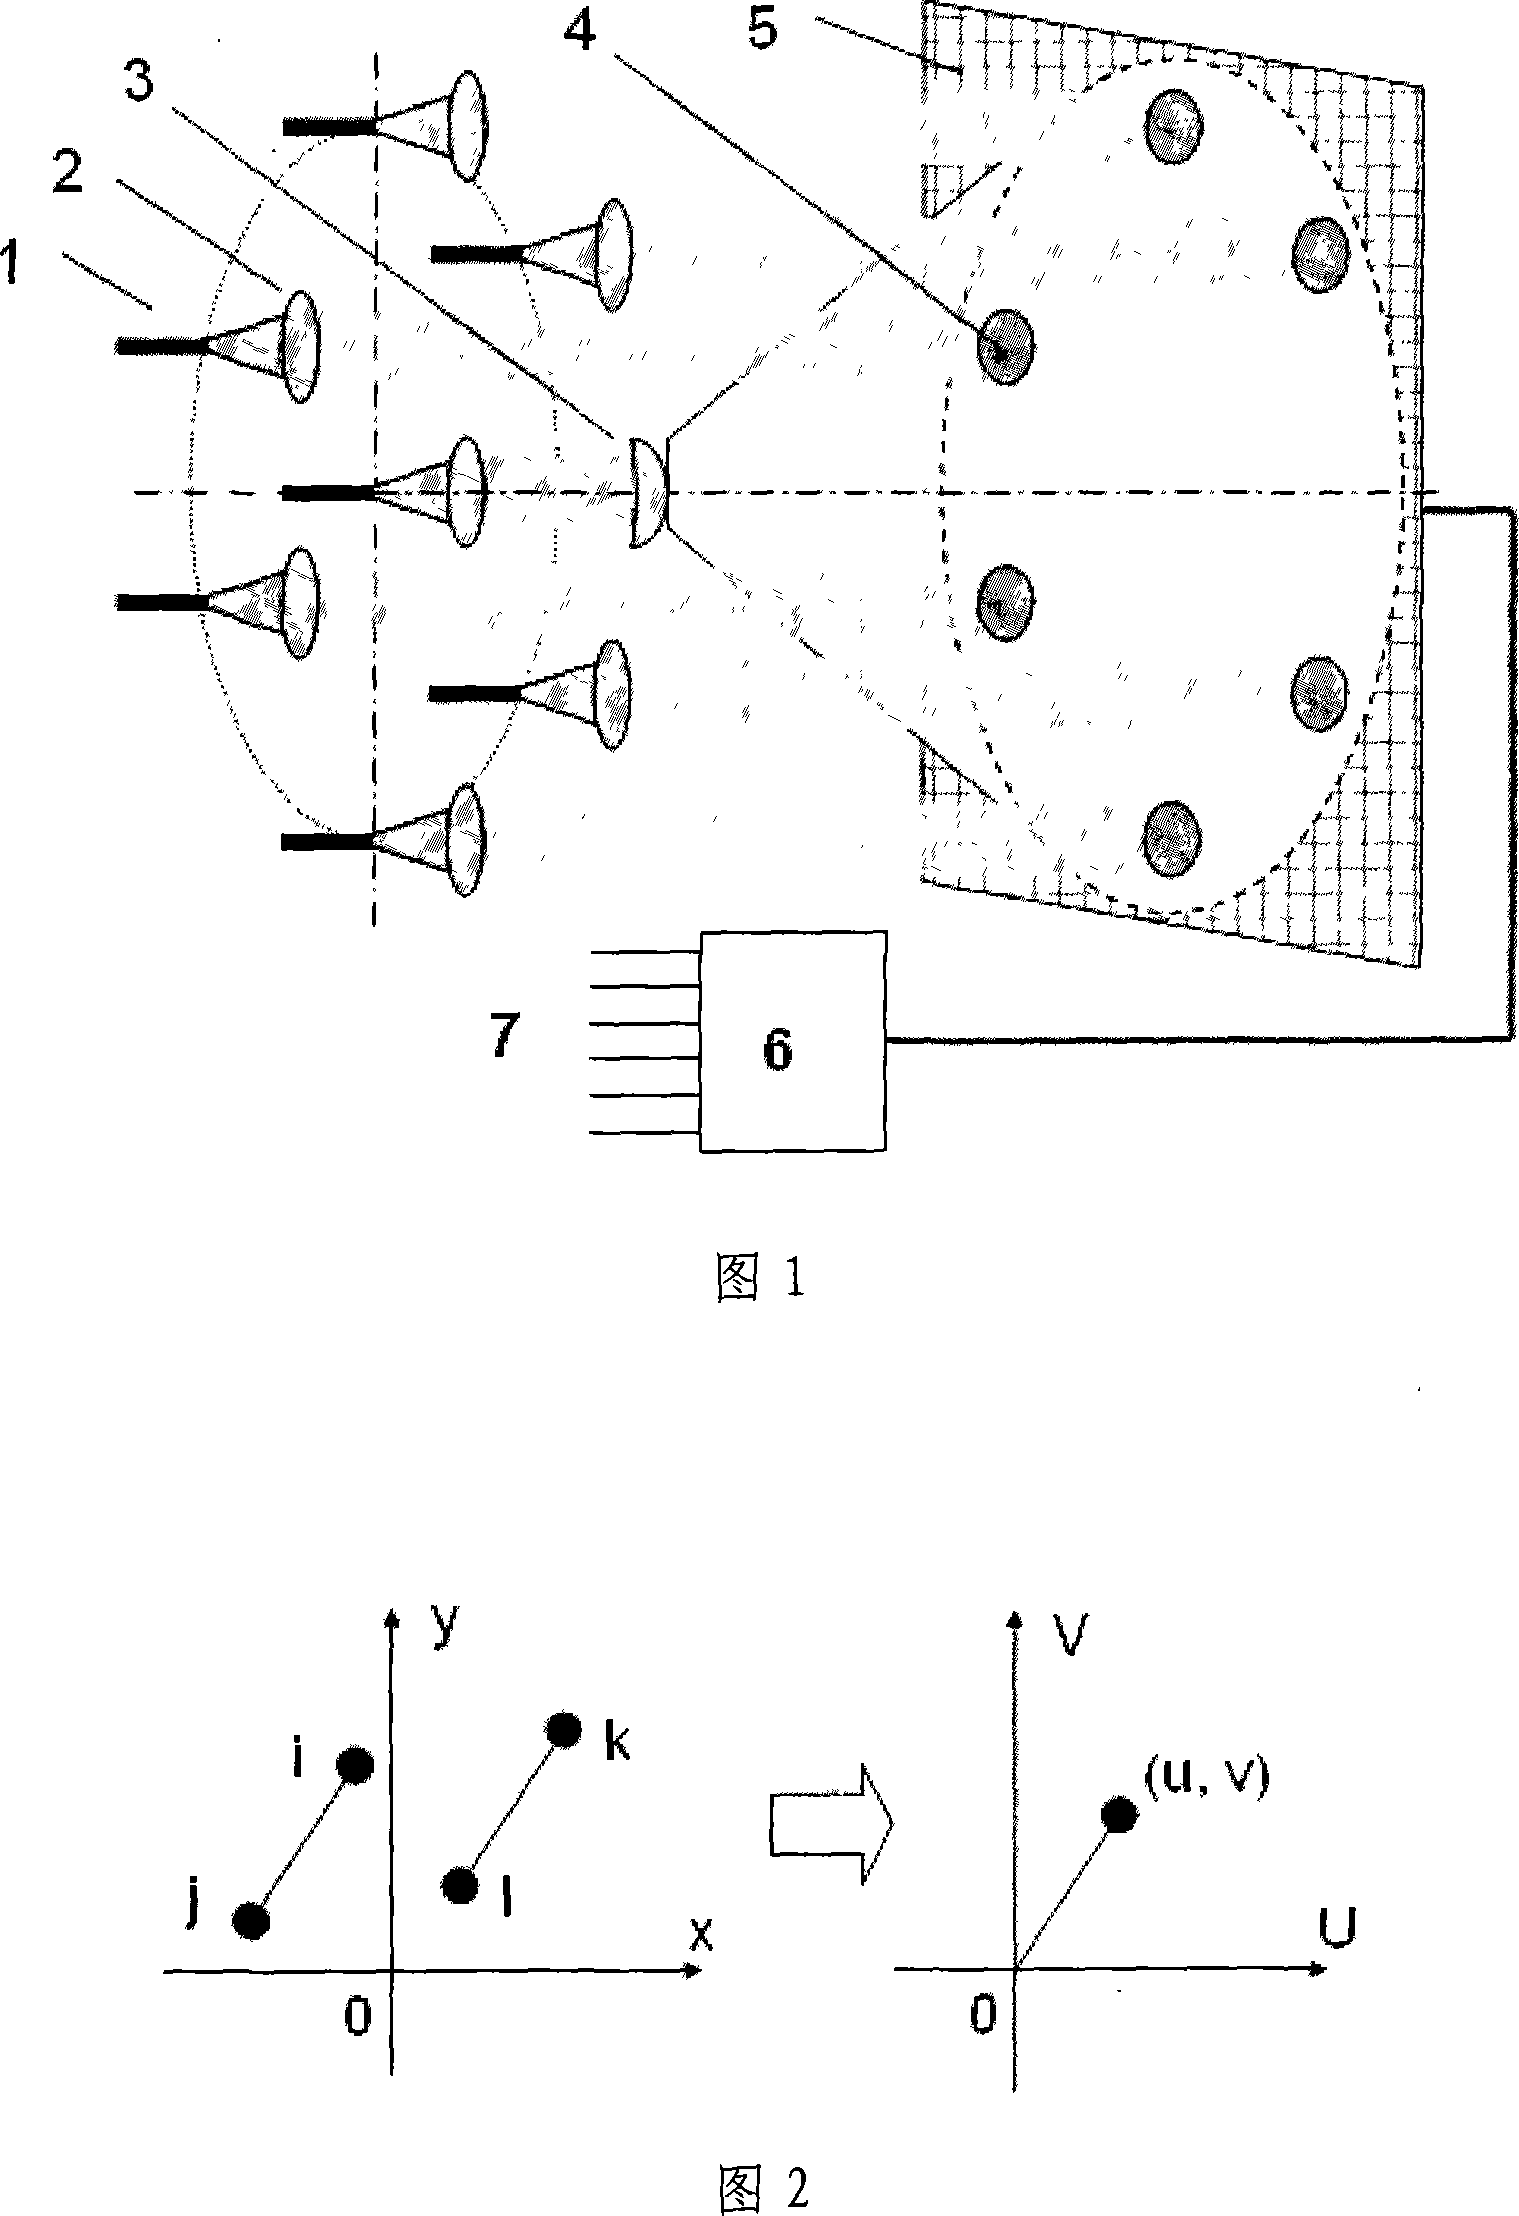 Integral aperture phase measurement and compensation method and system